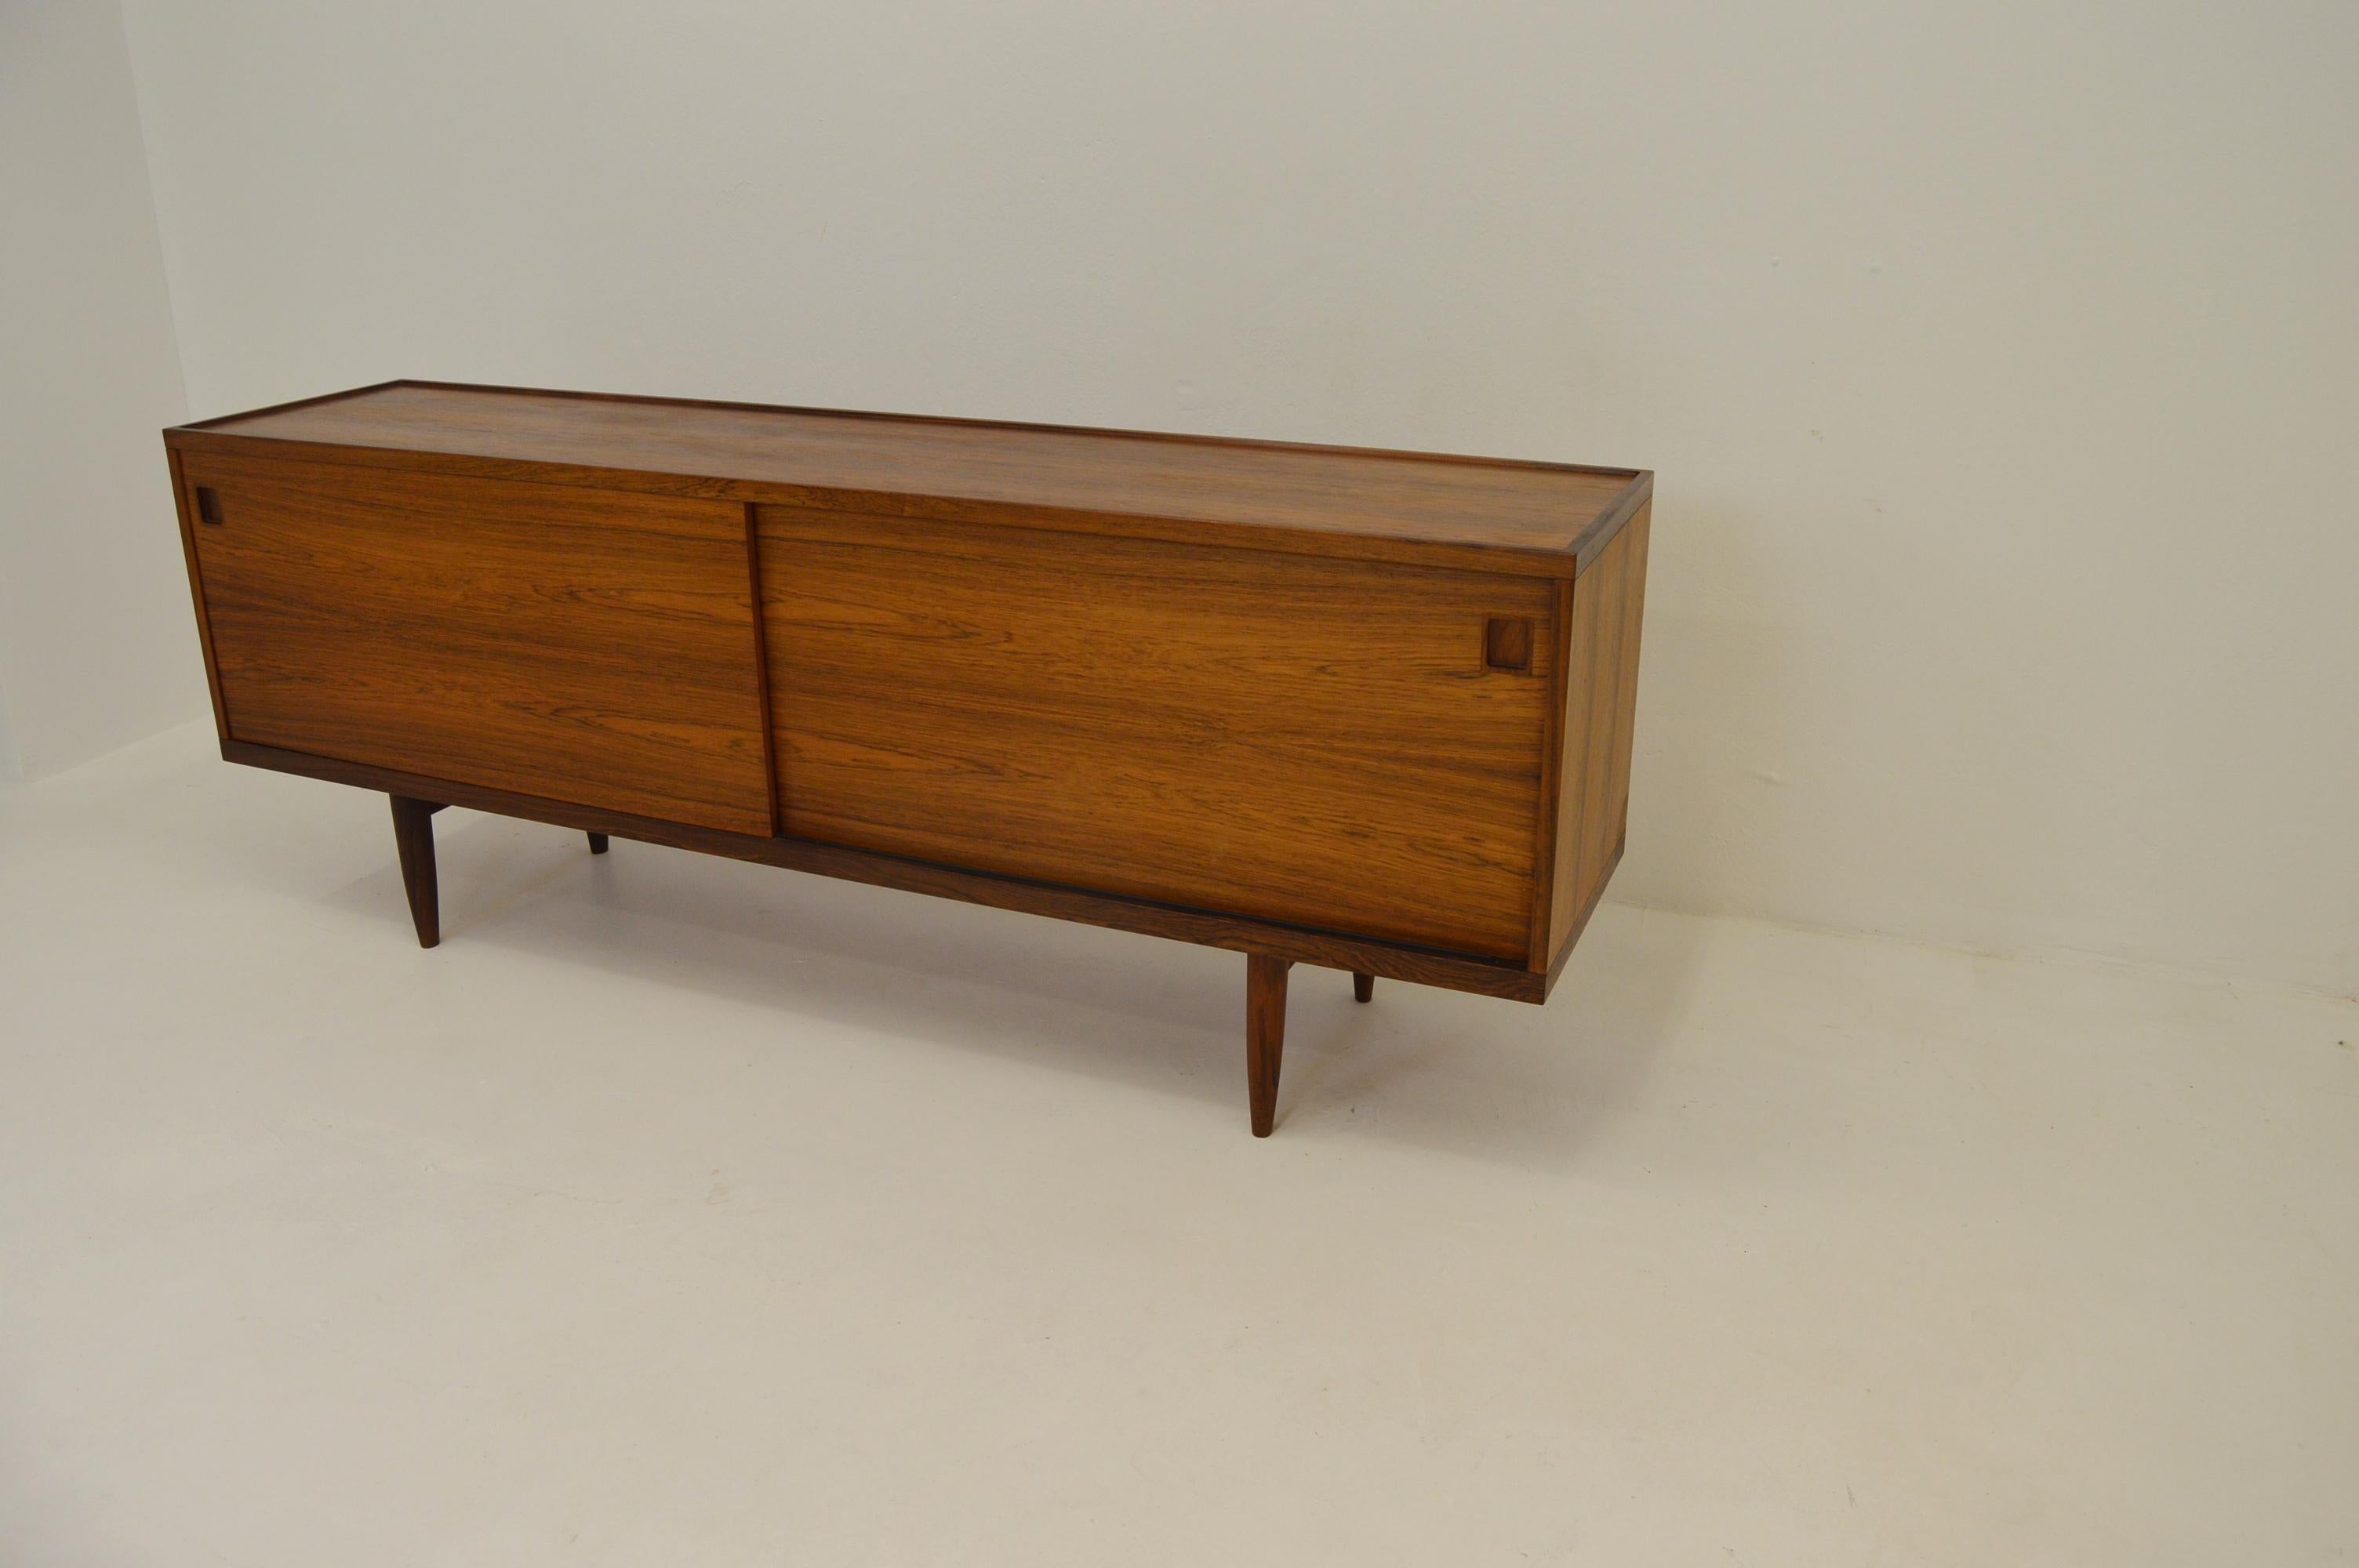 Sideboard model no 20 in rosewood. Produced in Denmark by JL Möller.

This credenza is protected by the CITES regulation. Permits for trading within Europe exist. For transport outside Europe we are happy to seek an export permit.